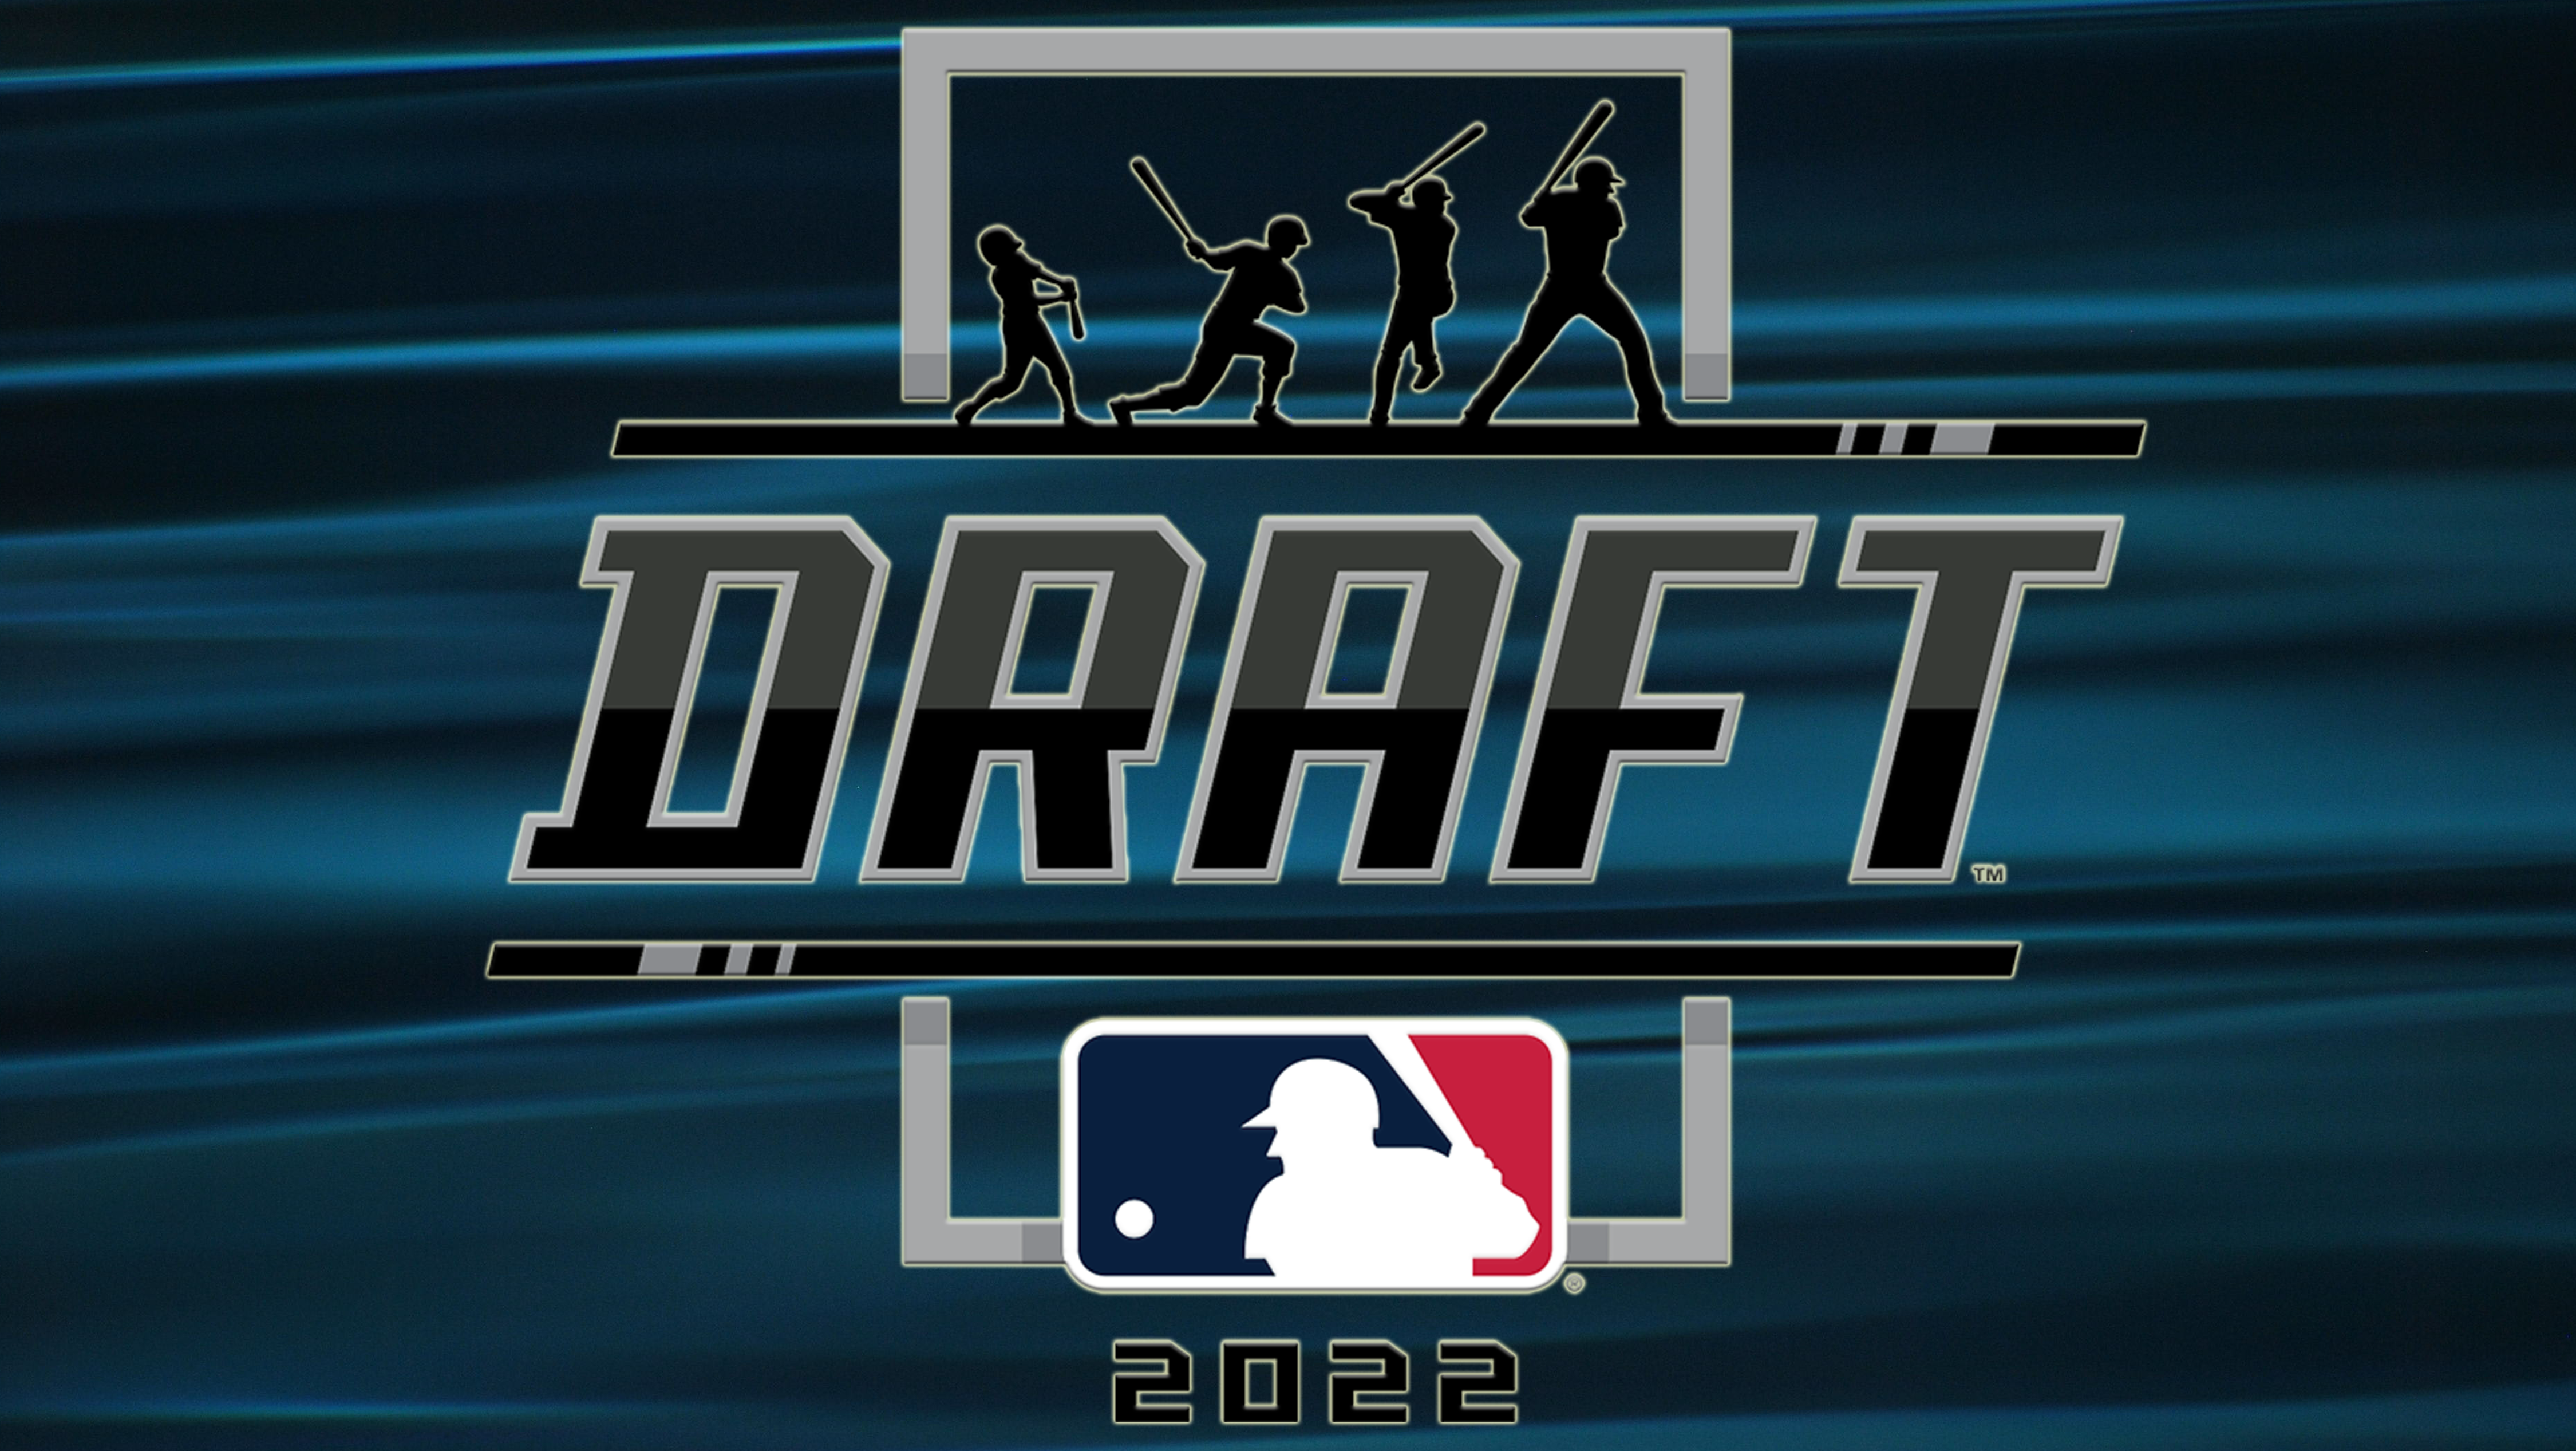 Former Notre Dame players in the minor leagues in 2022